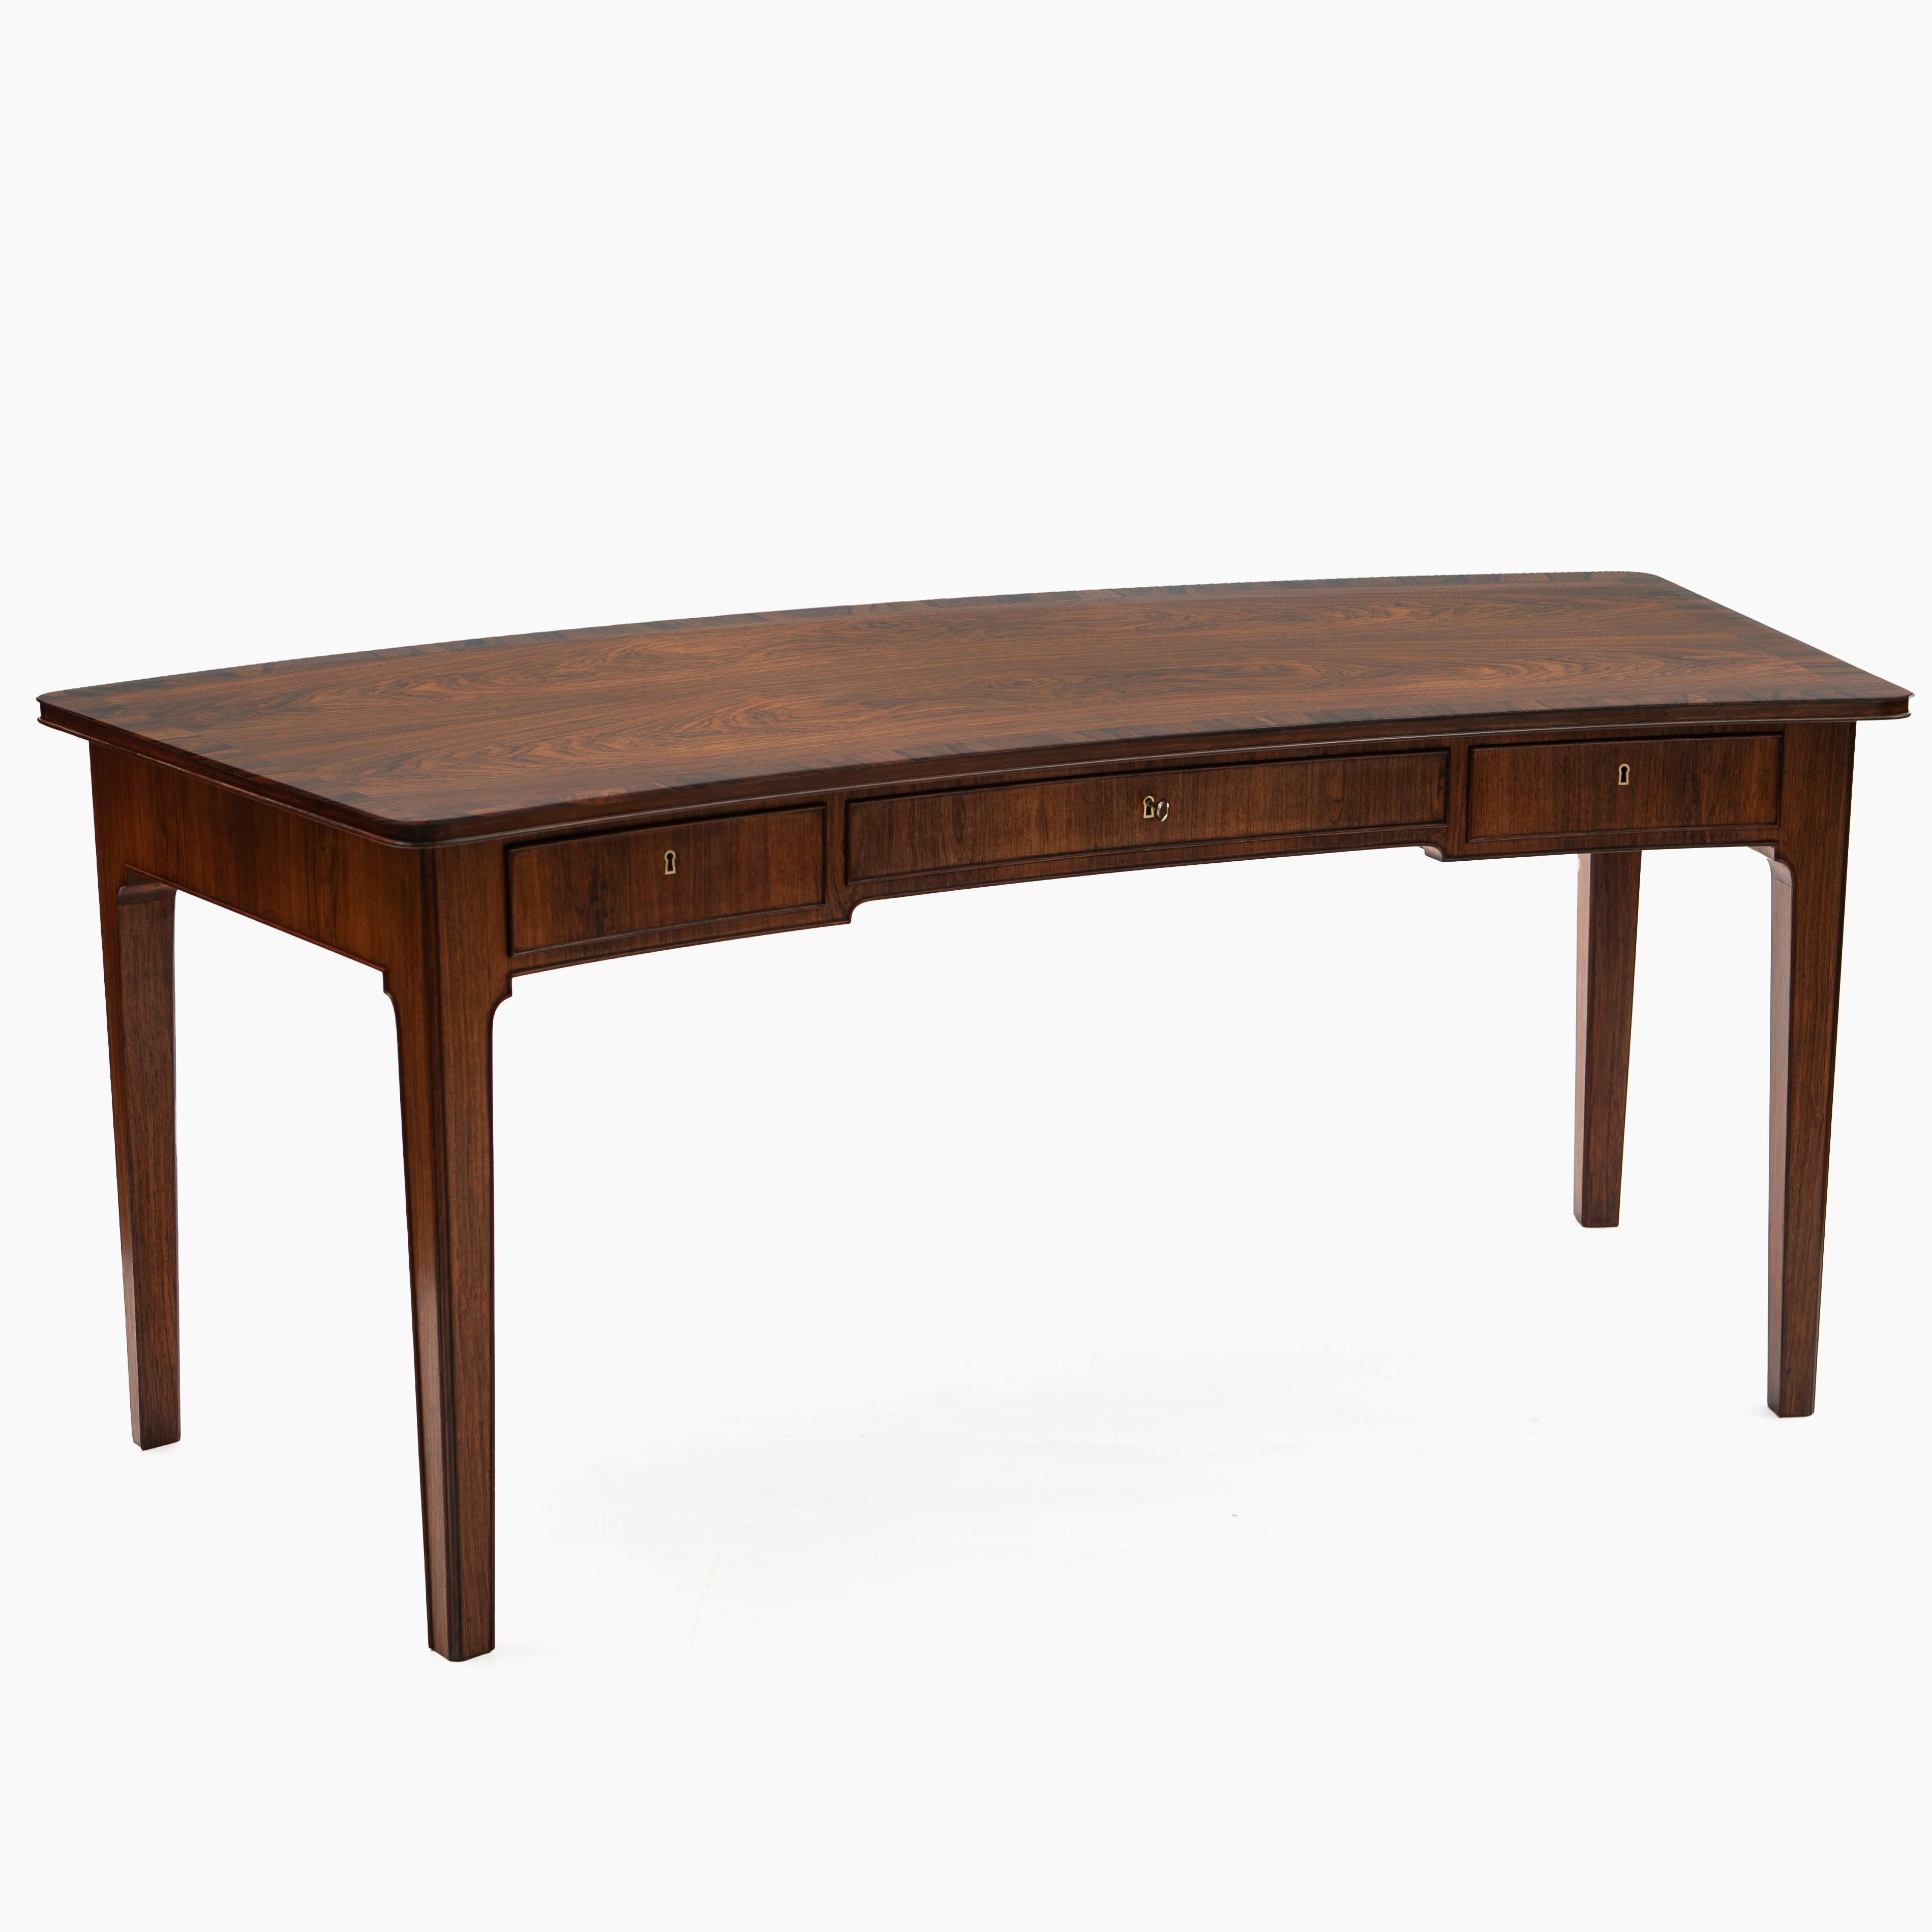 A very rare and exceptional desk made in Rio rosewood. Likely to be one of a kind, made by cabinetmaker C.B. Hansen, labelled accordingly.
The desk features an elegant and unique crescent silhouette and gorgeous rosewood grain.
Table top with a